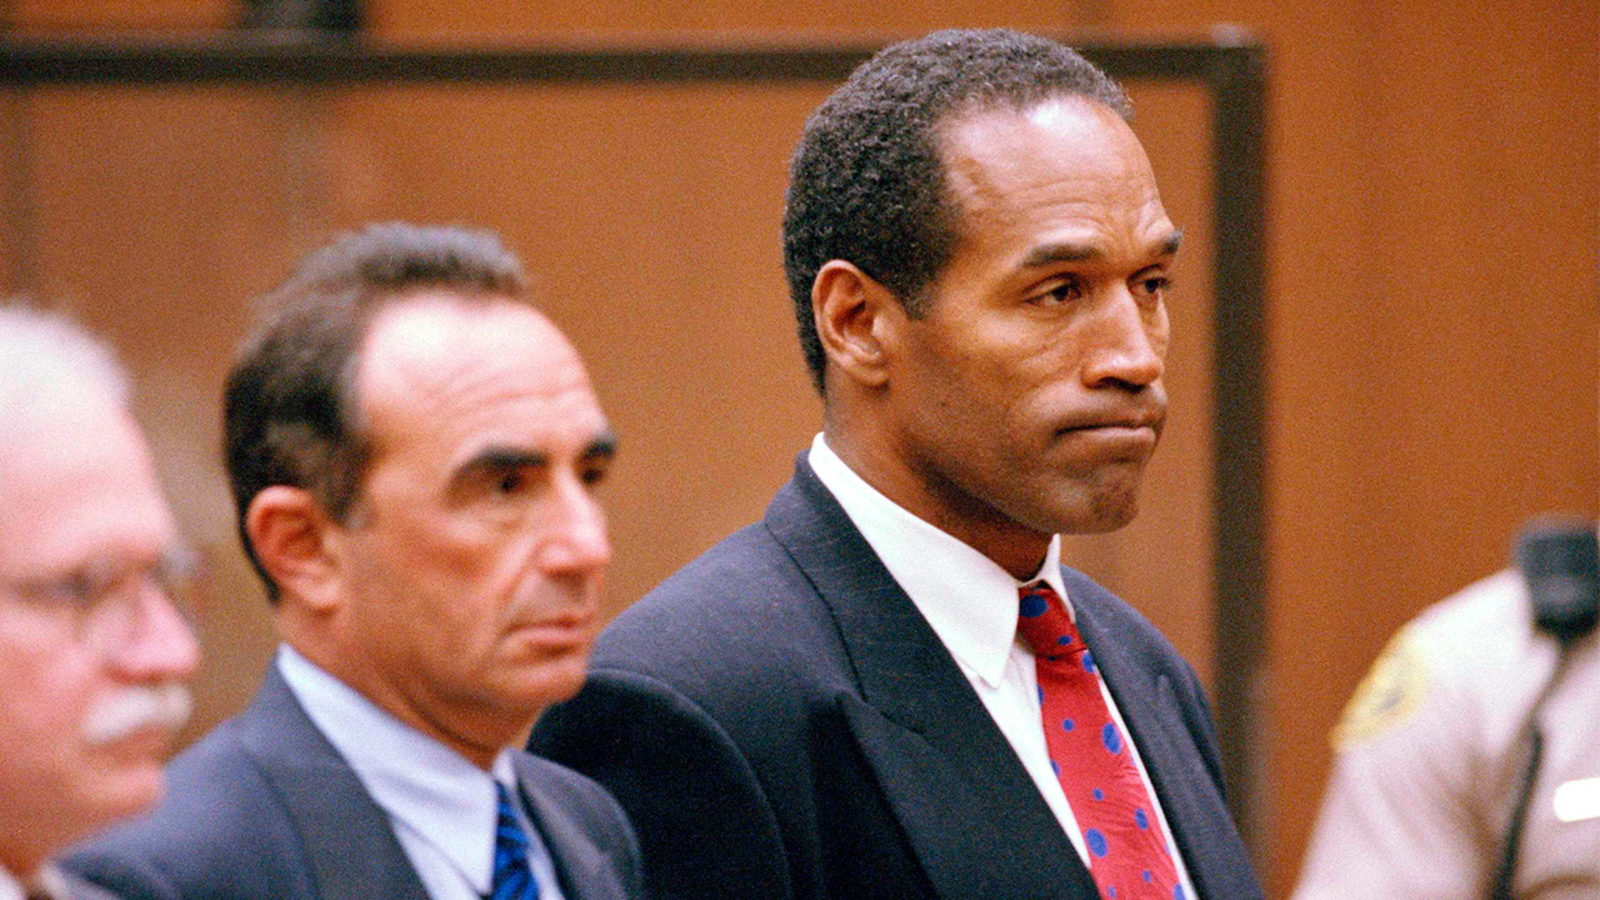 The OJ Simpson case: The murders Nicole Brown Simpson and Ronald Goldman, the Bronco chase, and the ‘trial of the century’ [Video]